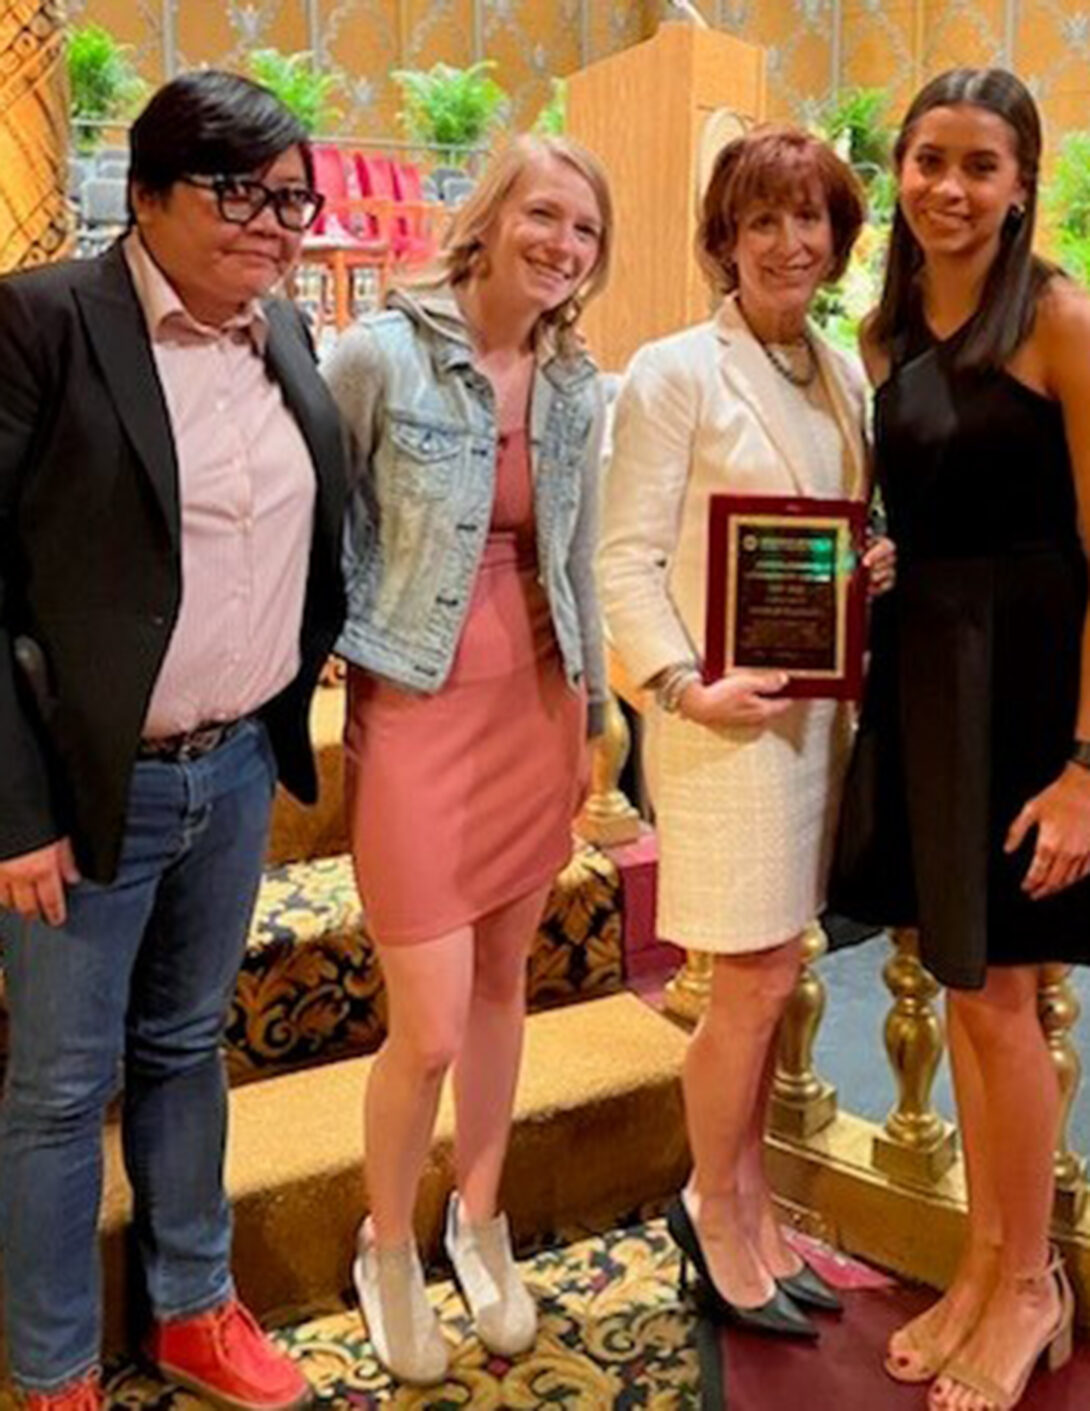 Accepting the award were SHIELD Illinois Operations Manager Shiow-Jiau Yung, Lab General Supervisor Jocelyn Carr, Assistant Dean for Operations Carol Schuster, and Collection Site Supervisor Bella Swan.